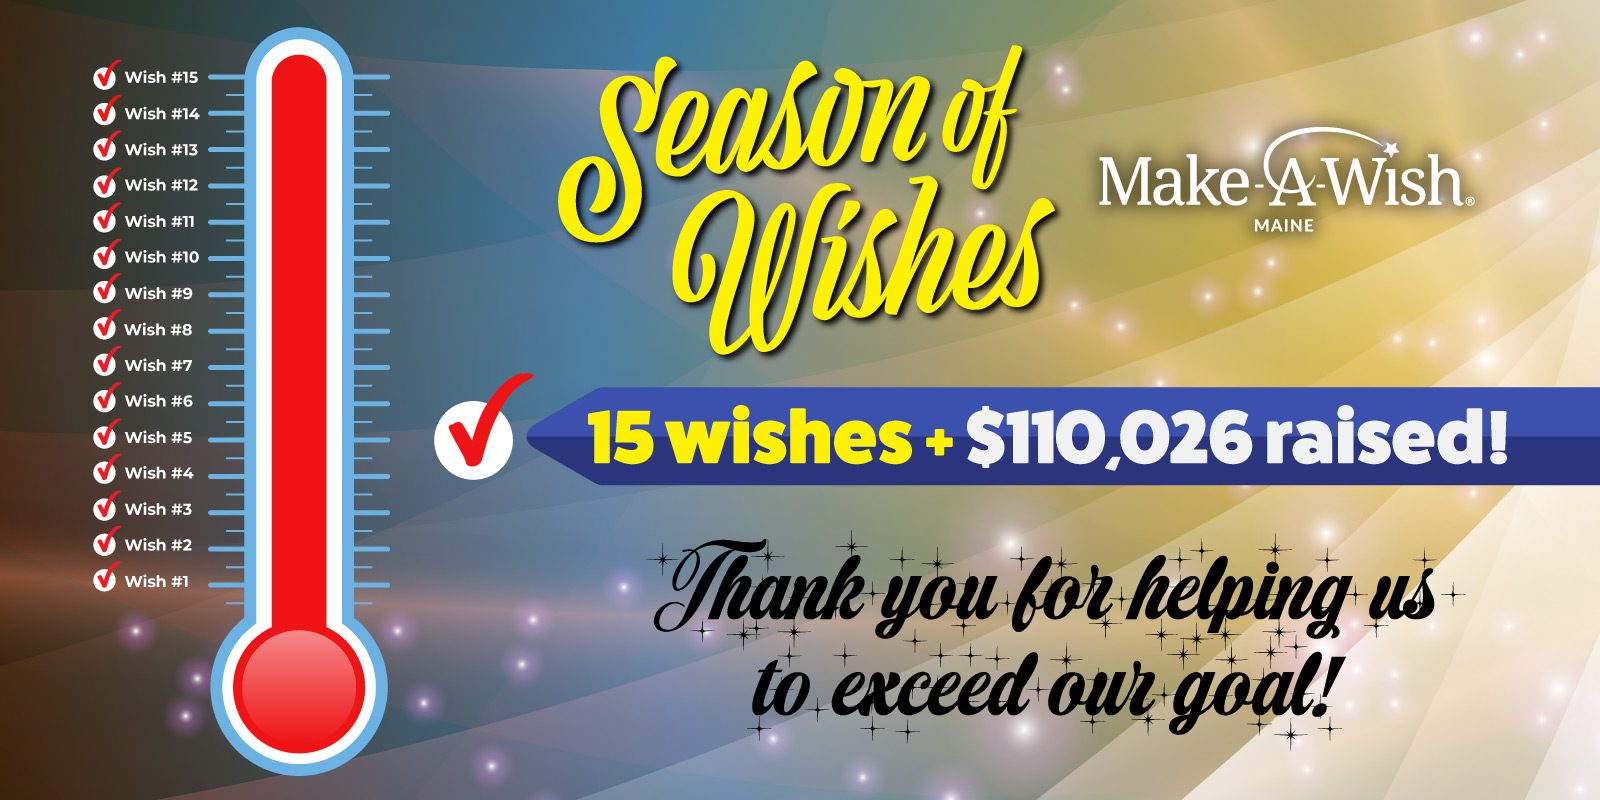 19th Annual Season of Wishes Raised Over $110,000